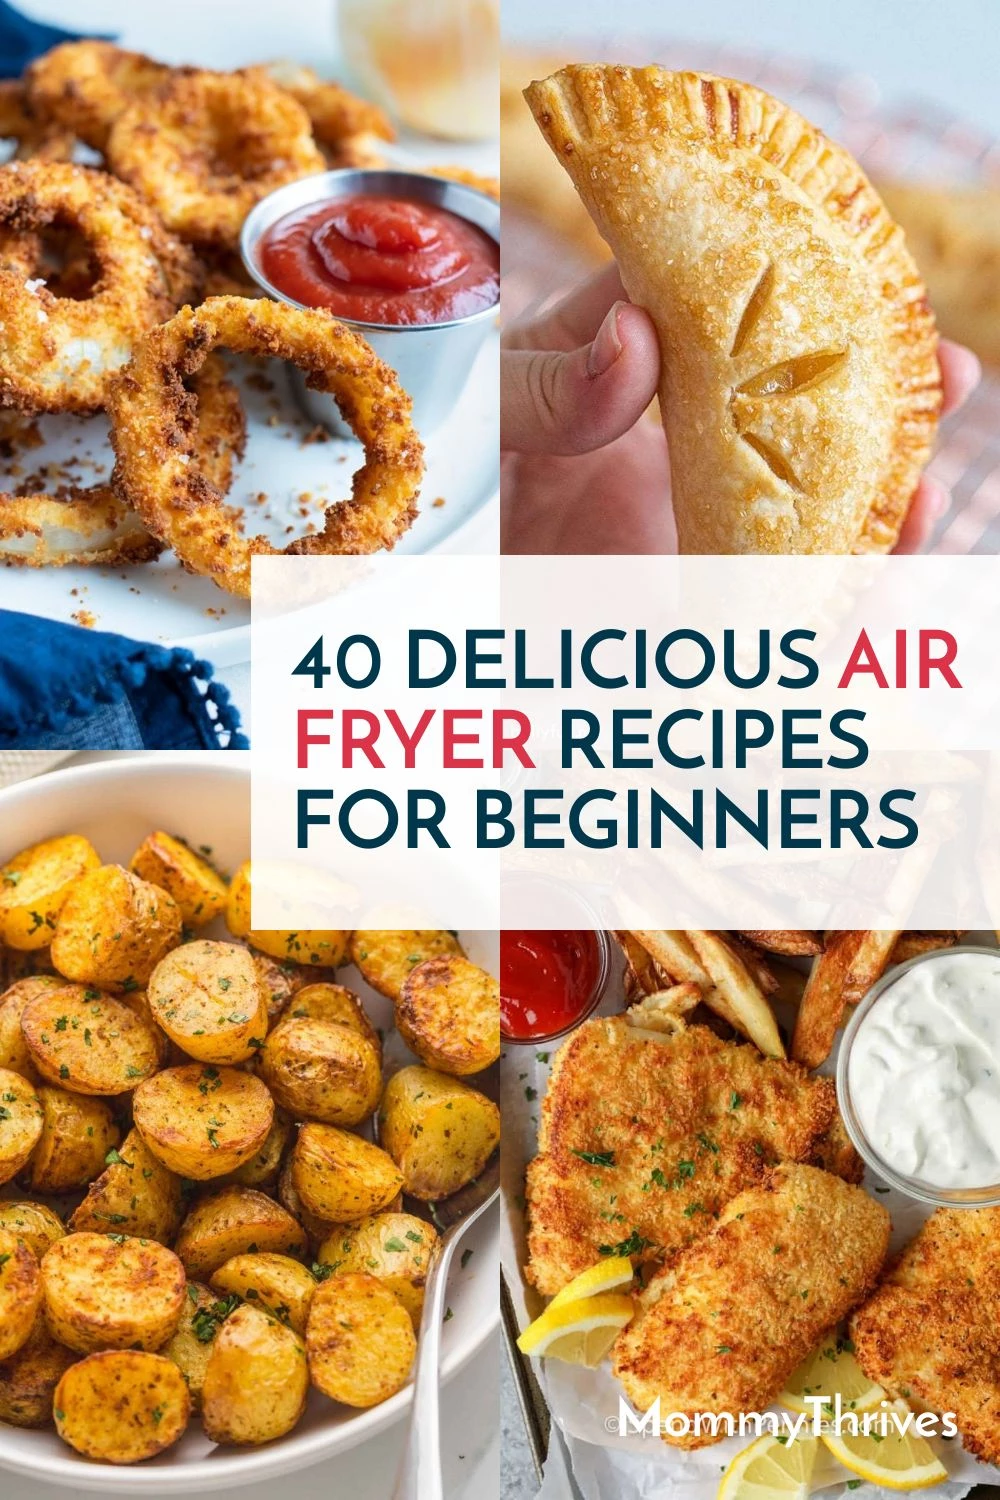 Delicious and Easy Air Fryer Meals - Air Fryer Meals For Your Family - Air Fryer Recipes To Start With